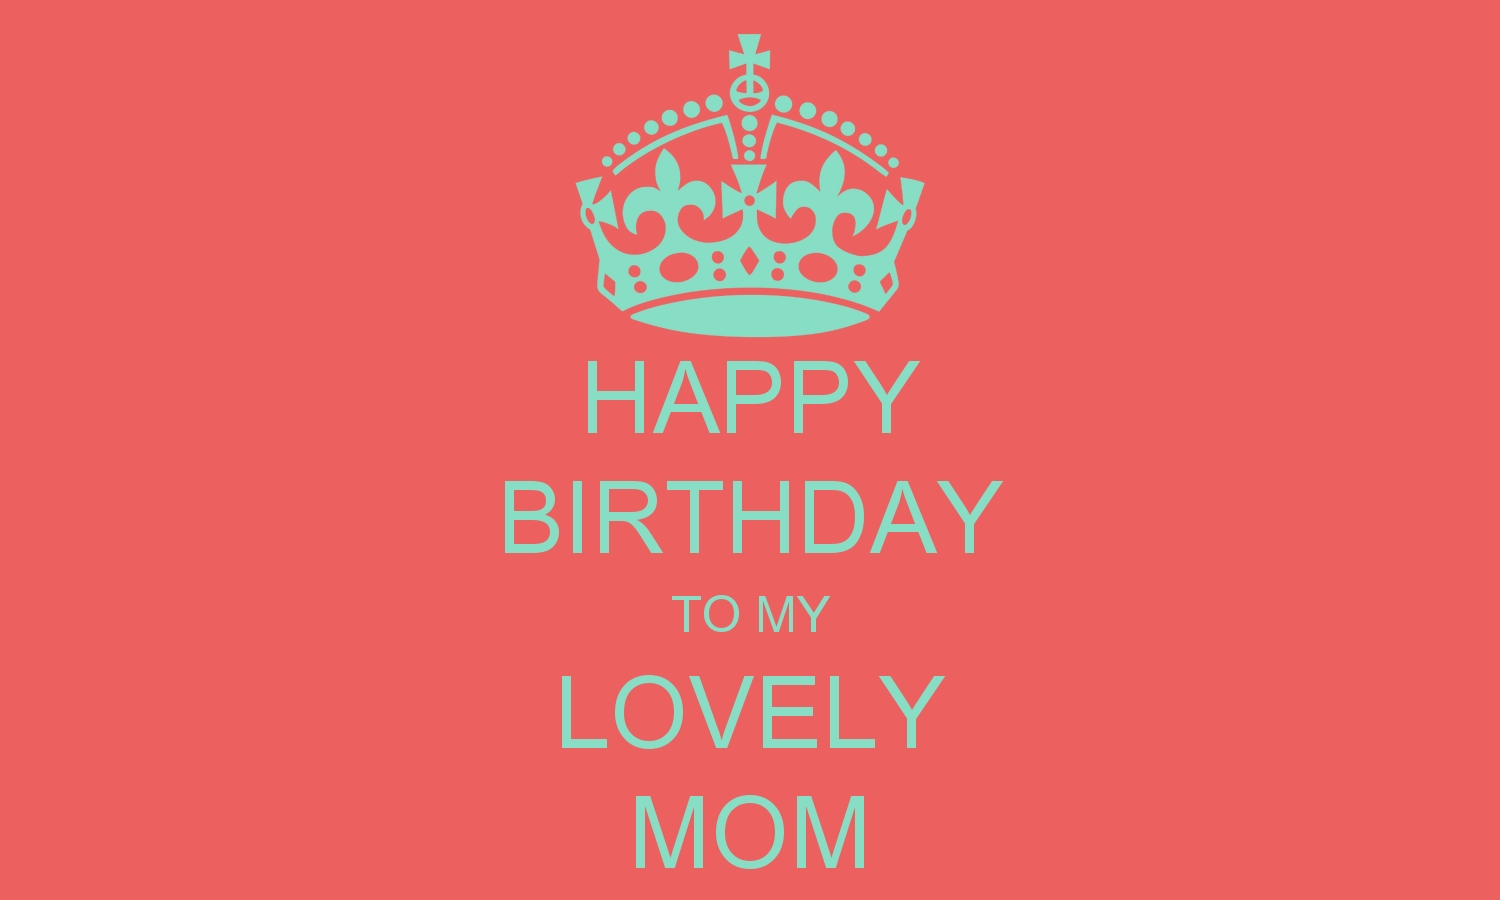 50 Best Happy Birthday Mother Wishes Images, For Mother / Mom